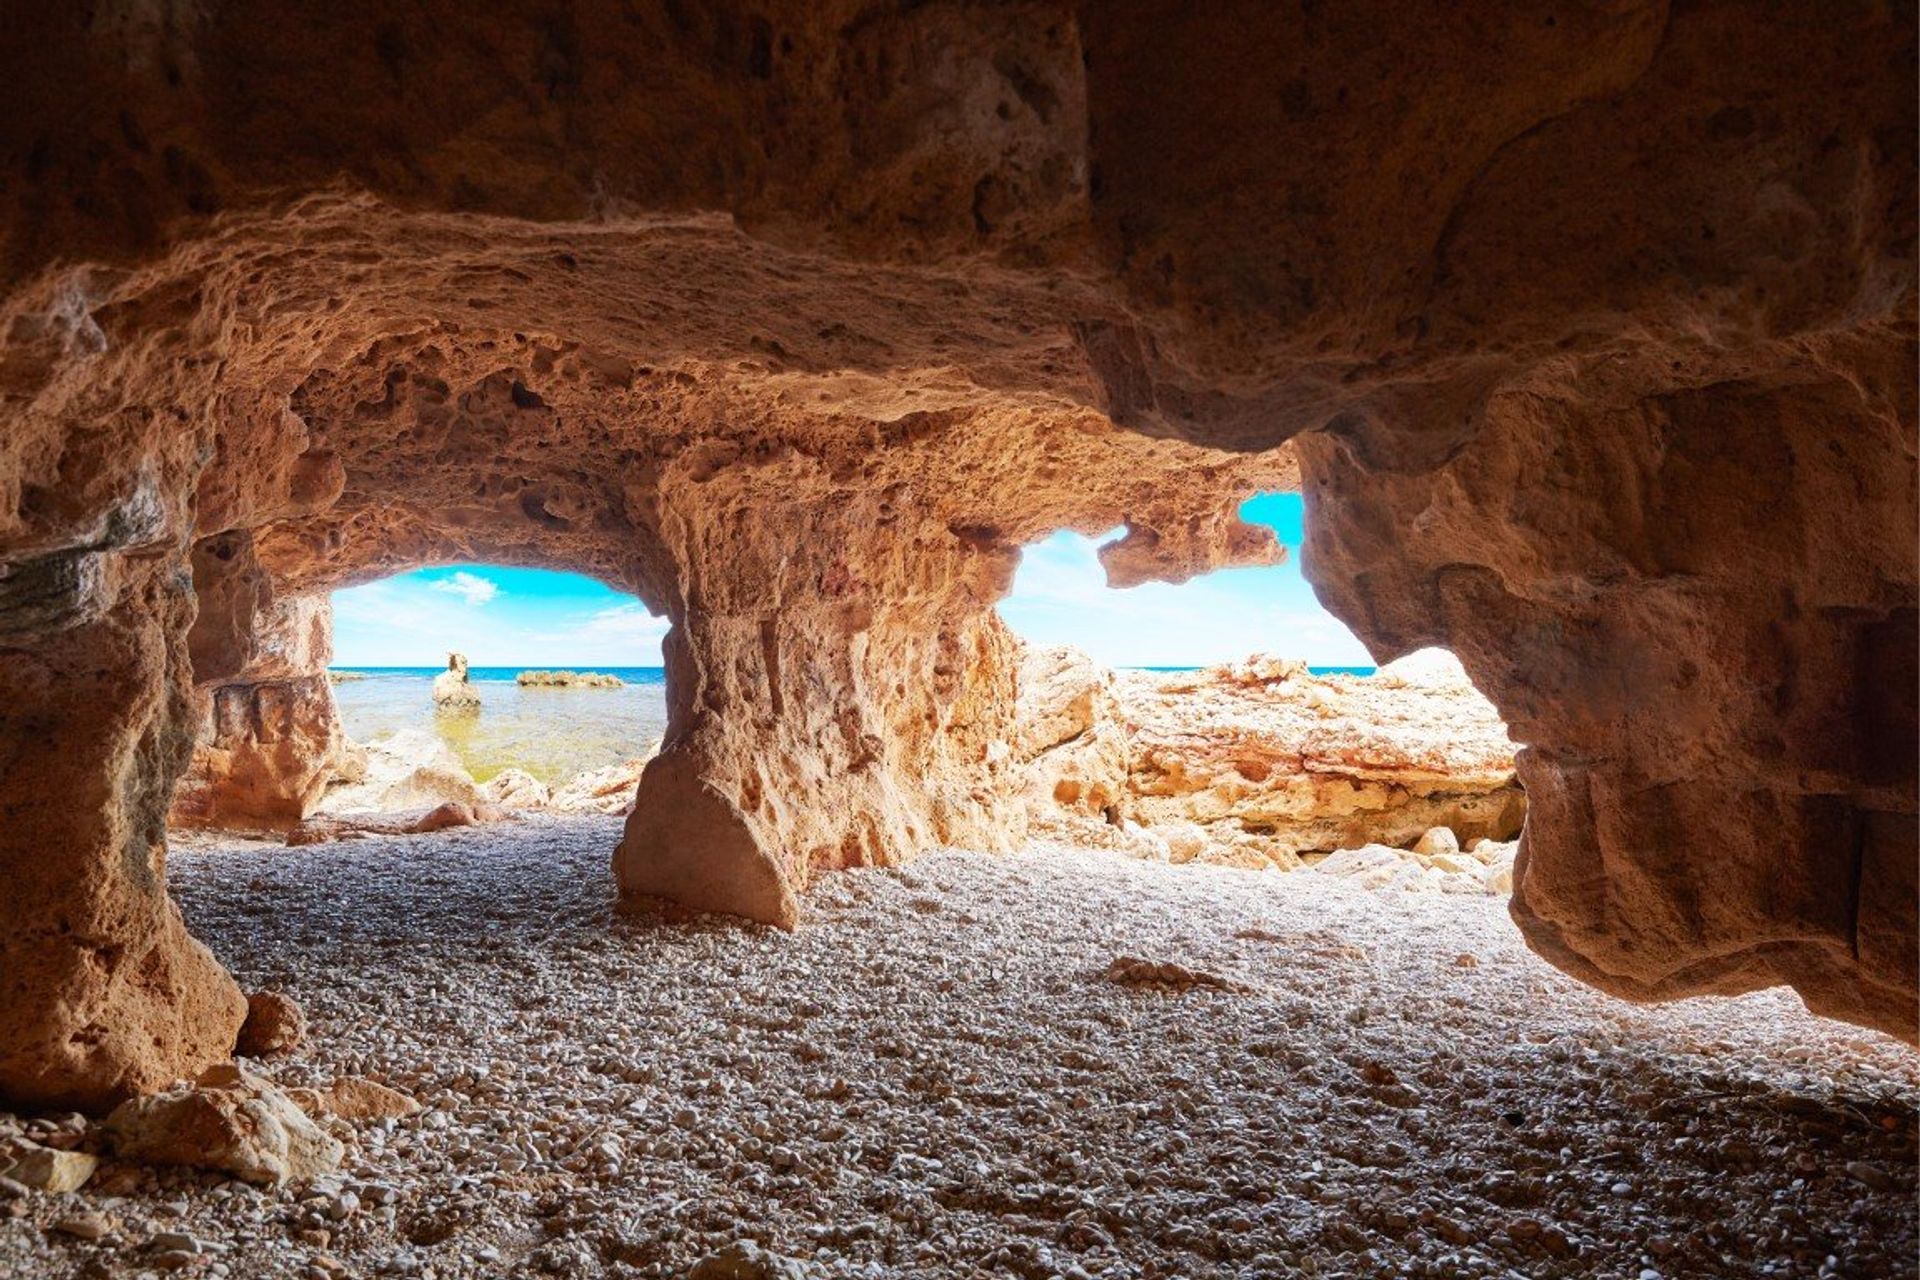 The natural beaches of La Rotas are home to some beautiful caves